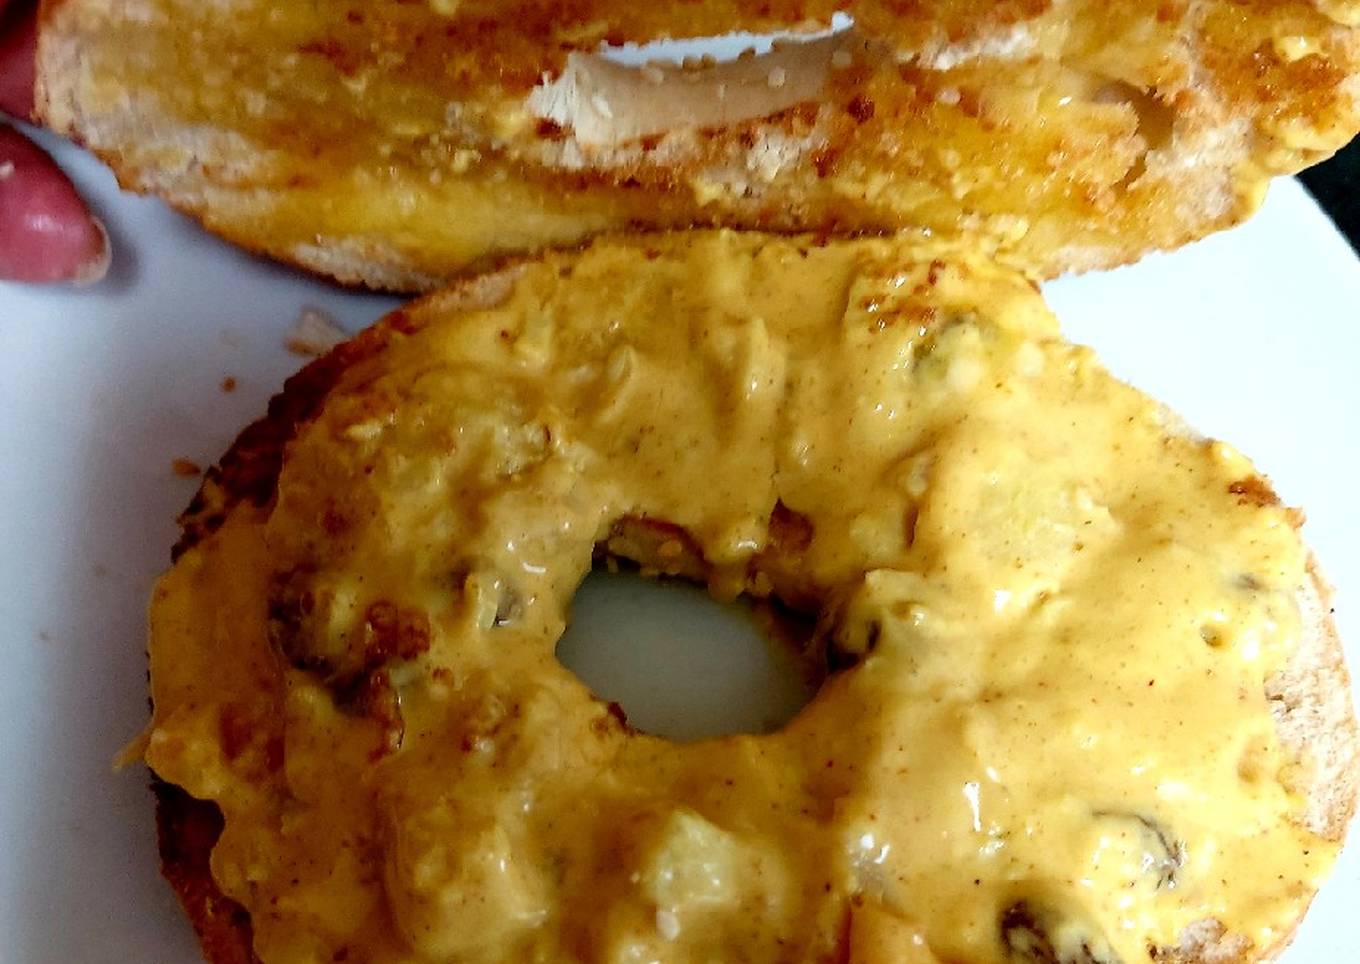 My Coronation Chicken Toasted Bagel 🥯 😋